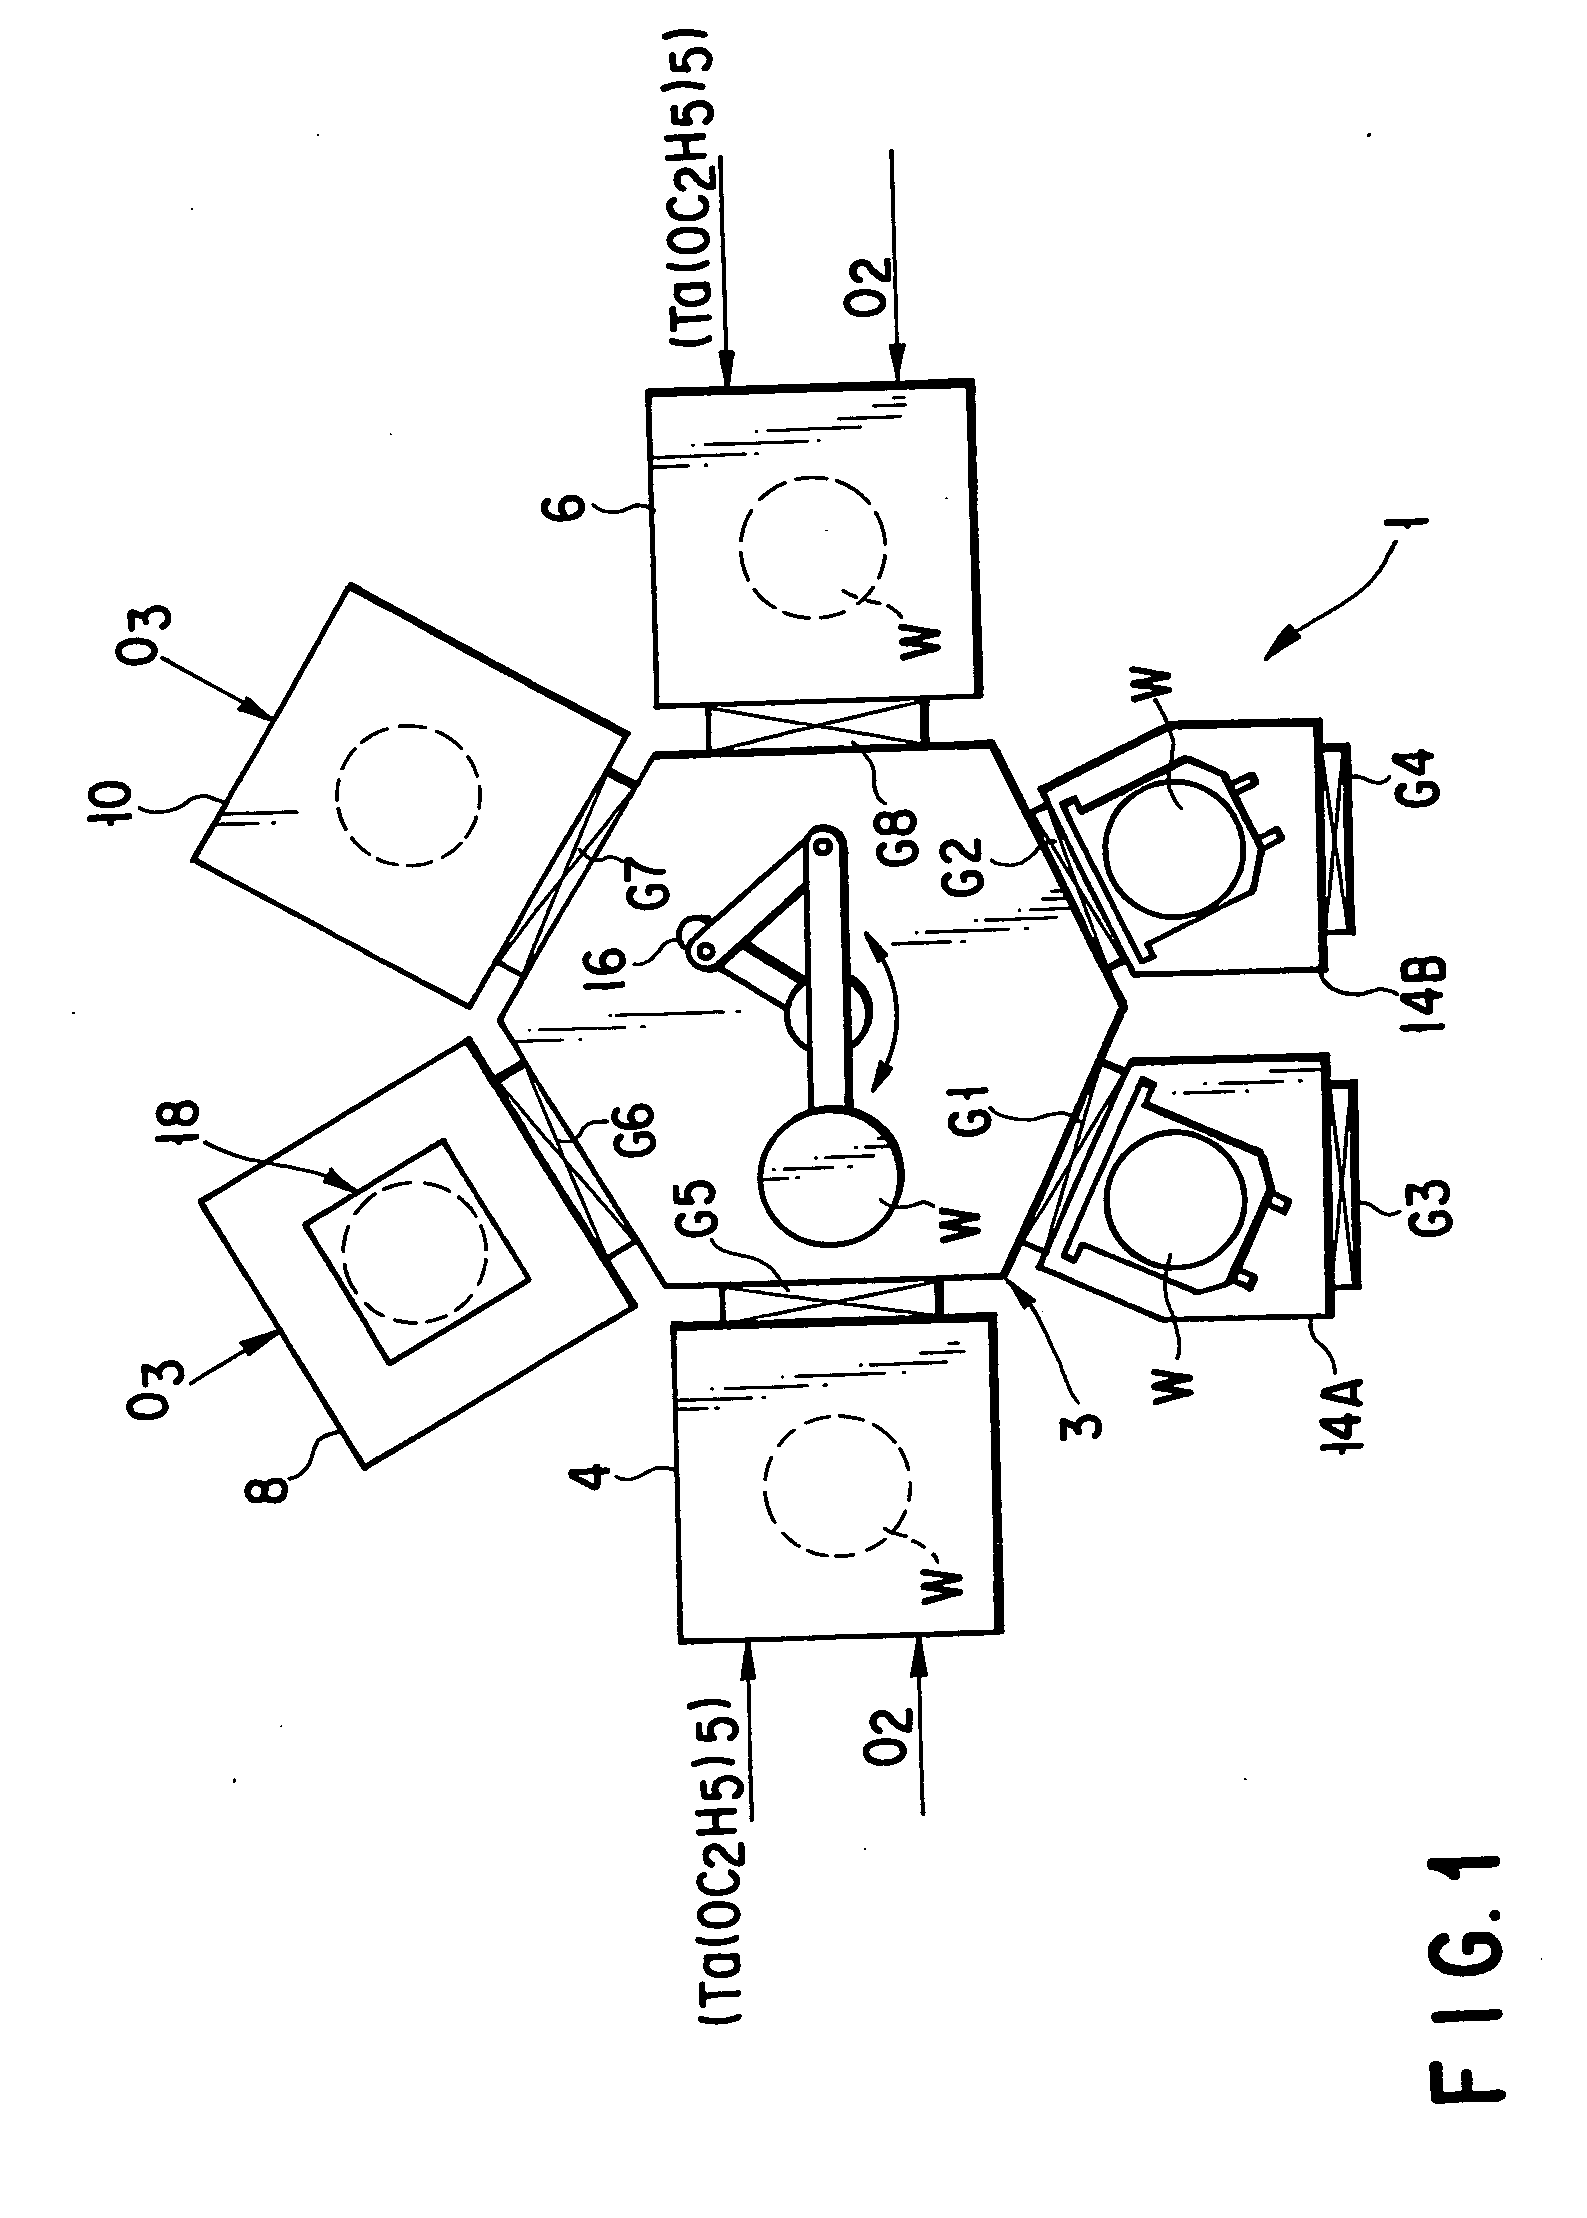 Single-substrate-heat-processing apparatus for performing reformation and crystallization